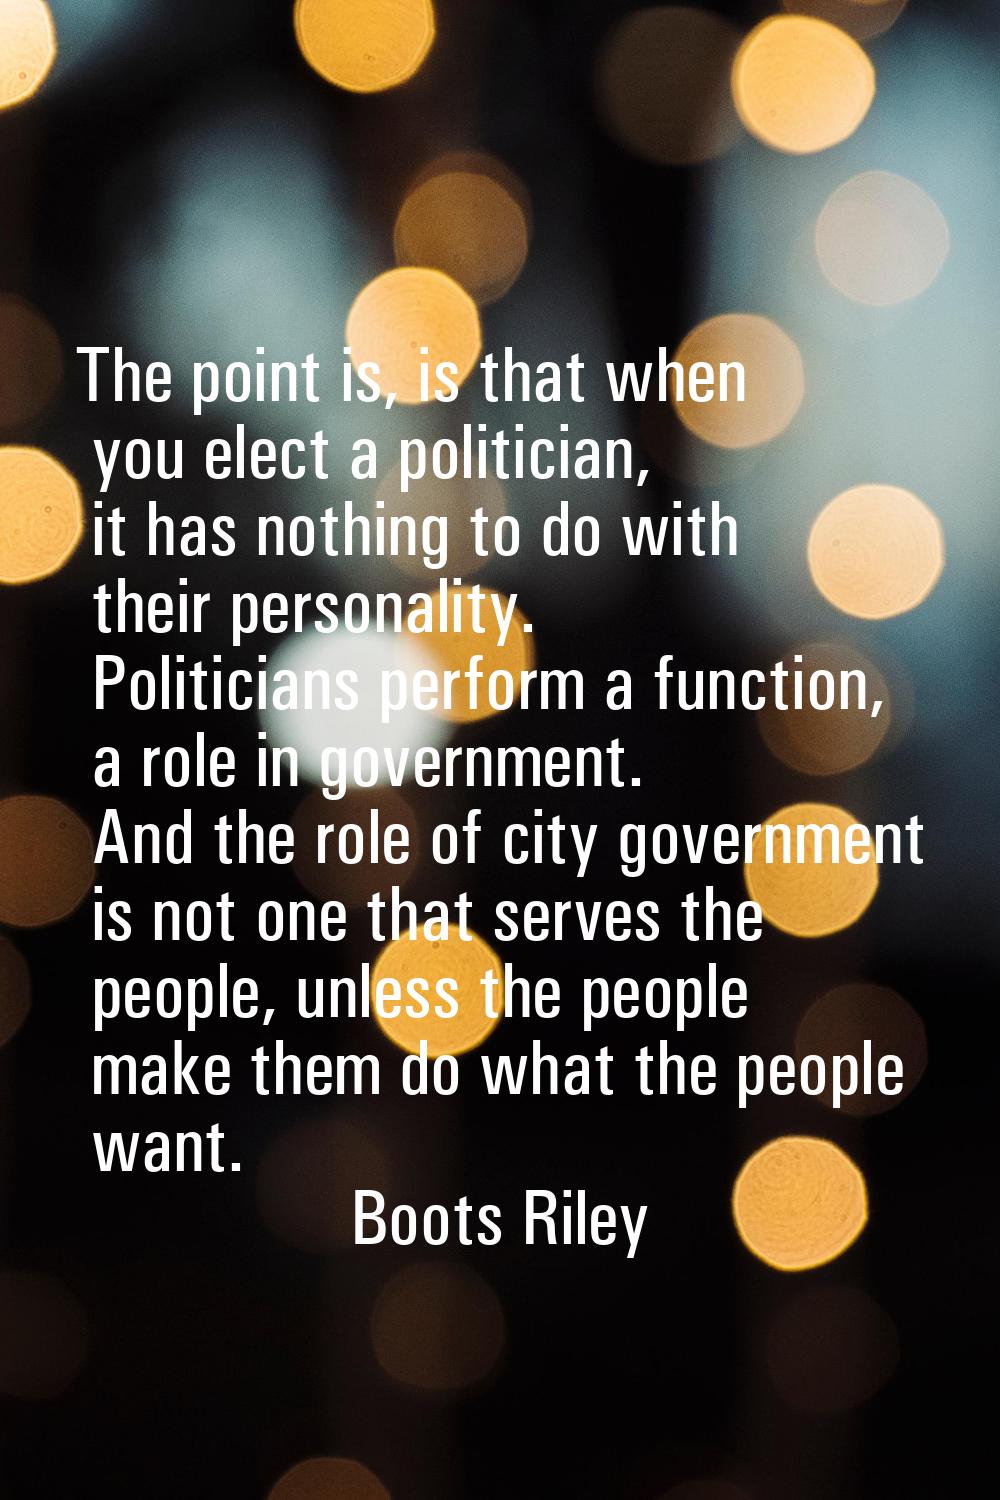 The point is, is that when you elect a politician, it has nothing to do with their personality. Pol